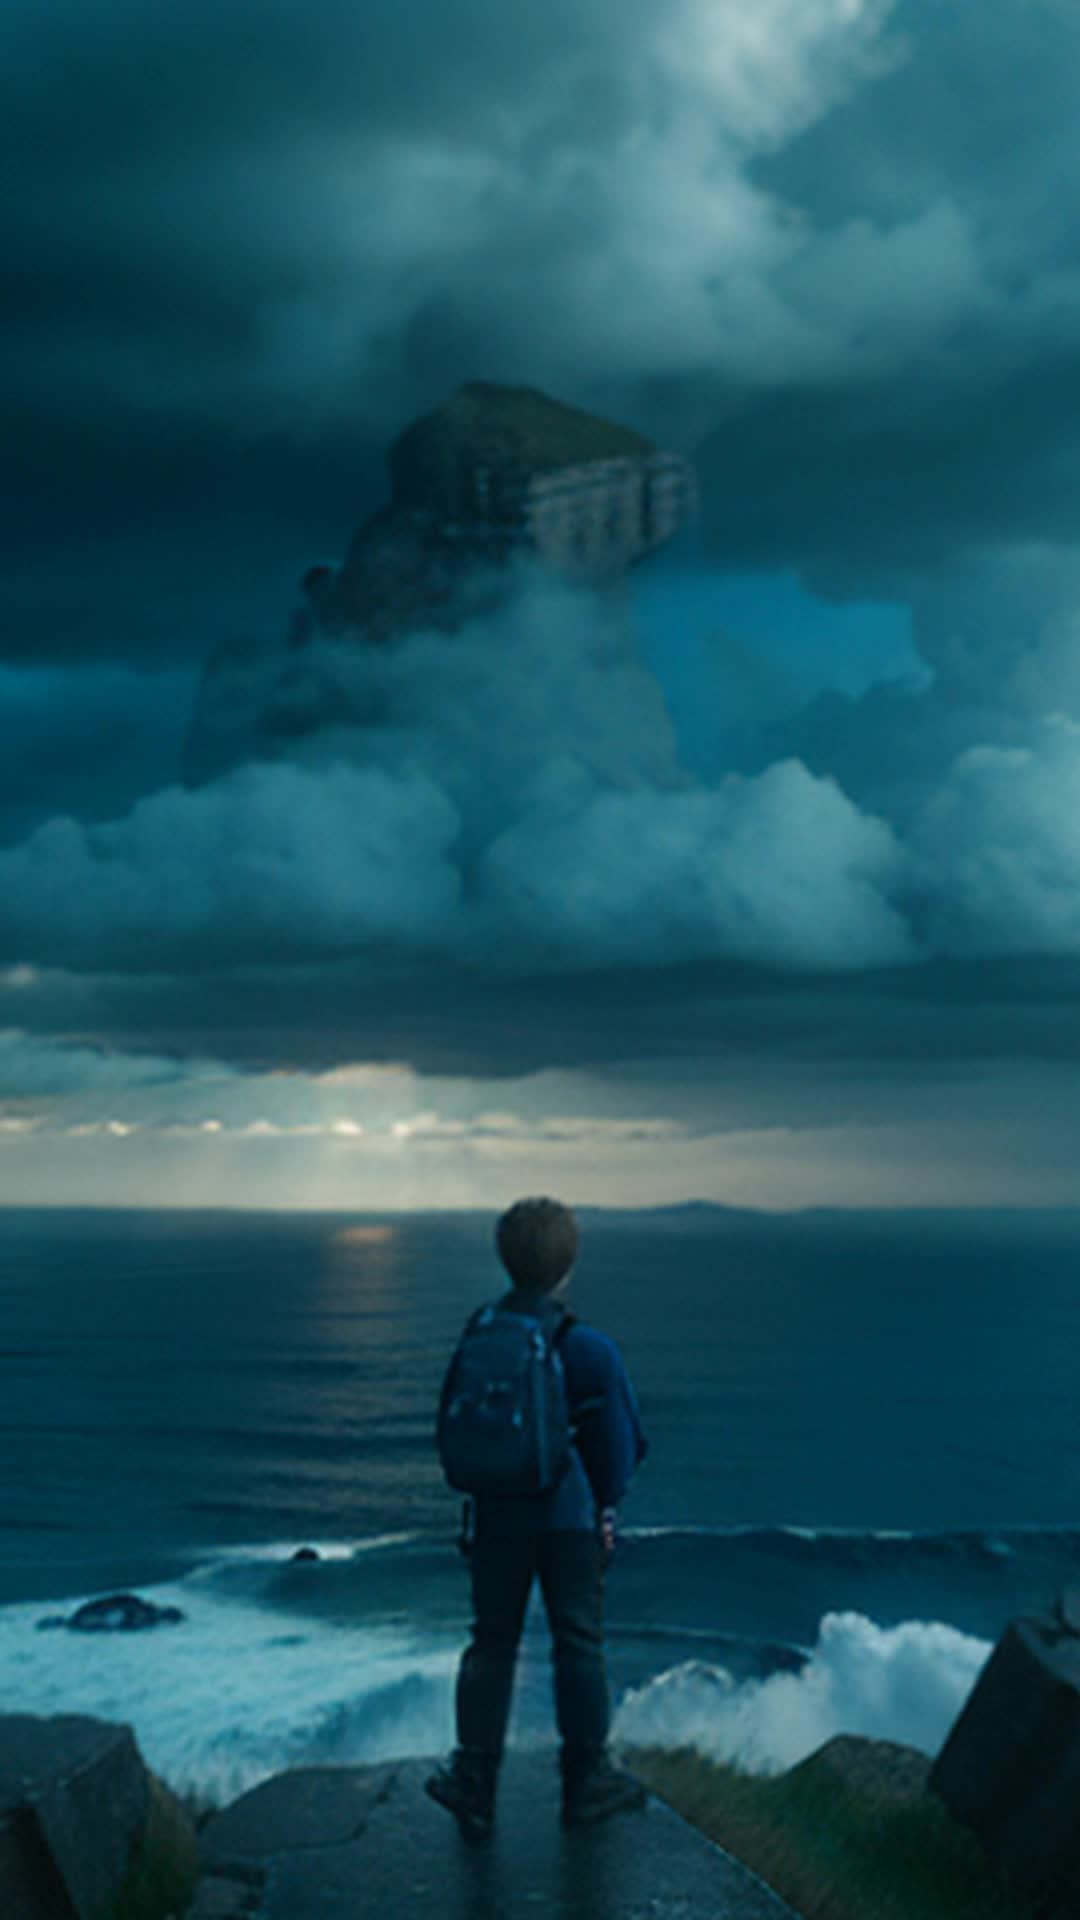 Boy facing horizon, determined to fight evil, windswept hair, craggy cliffs overlook ocean, storm clouds gathering, first step of retribution, dynamic wide-angle shot, highly detailed, ominous setting